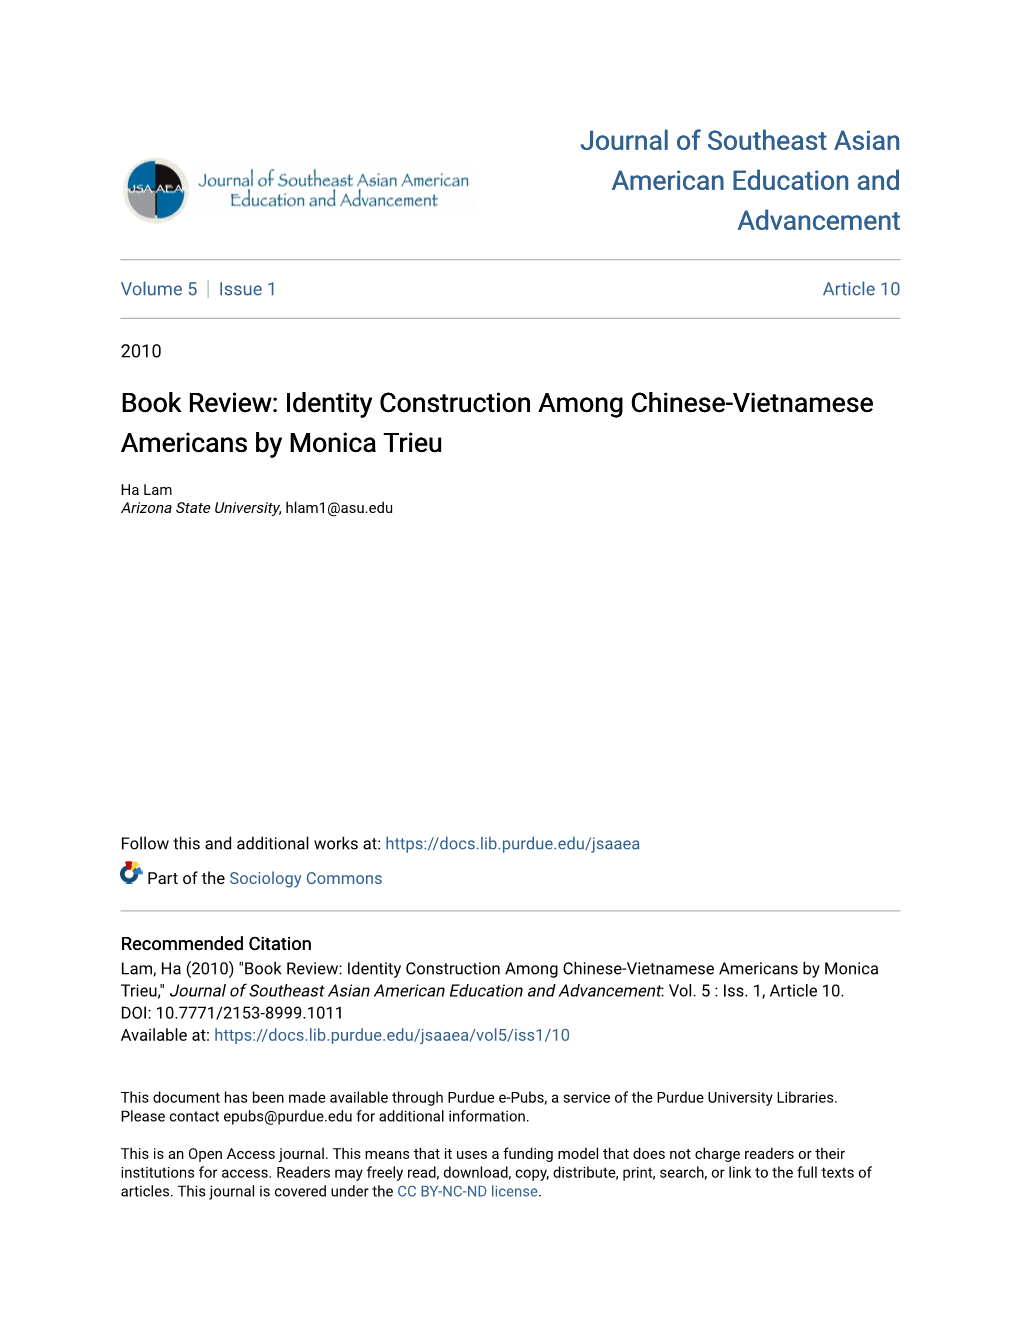 Identity Construction Among Chinese-Vietnamese Americans by Monica Trieu